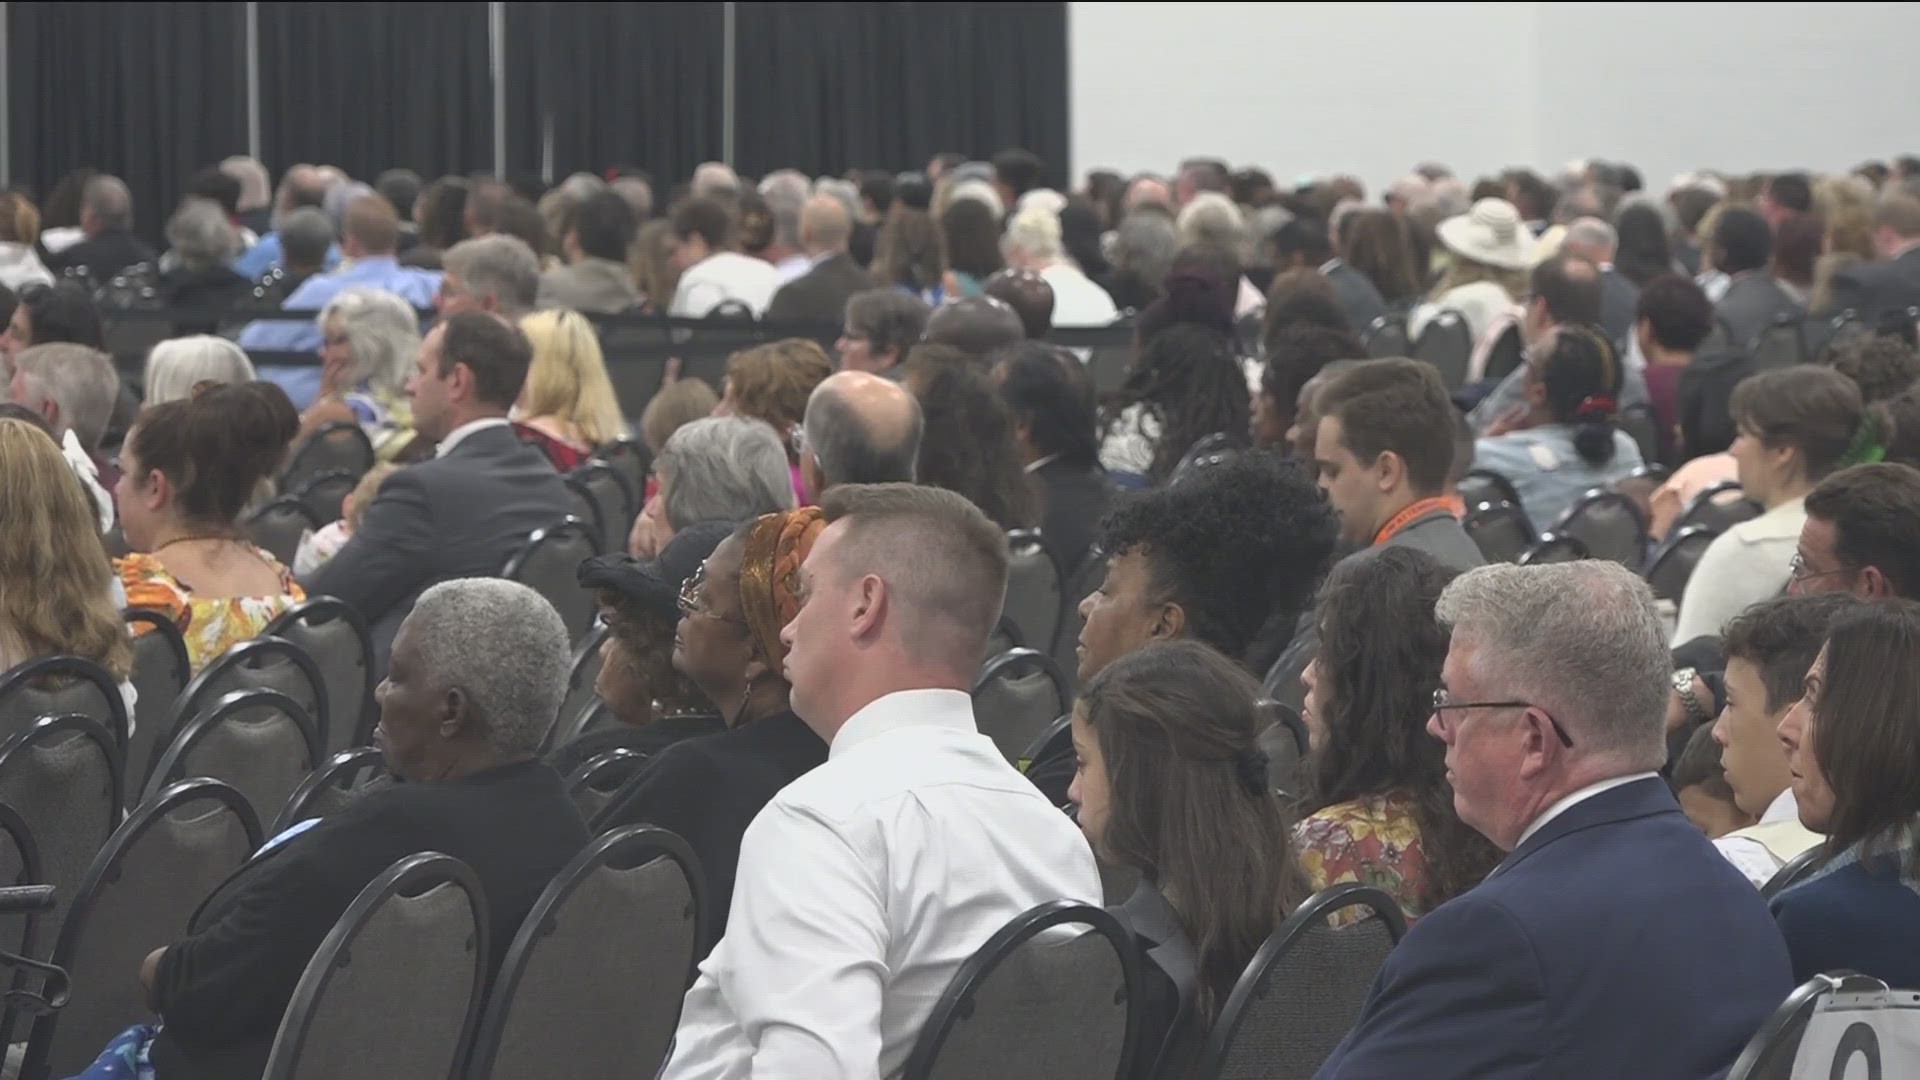 This weekend - the regional Jehovah's Witness organization had their first in-person convention in over three years and once again the convention was held in Toledo.